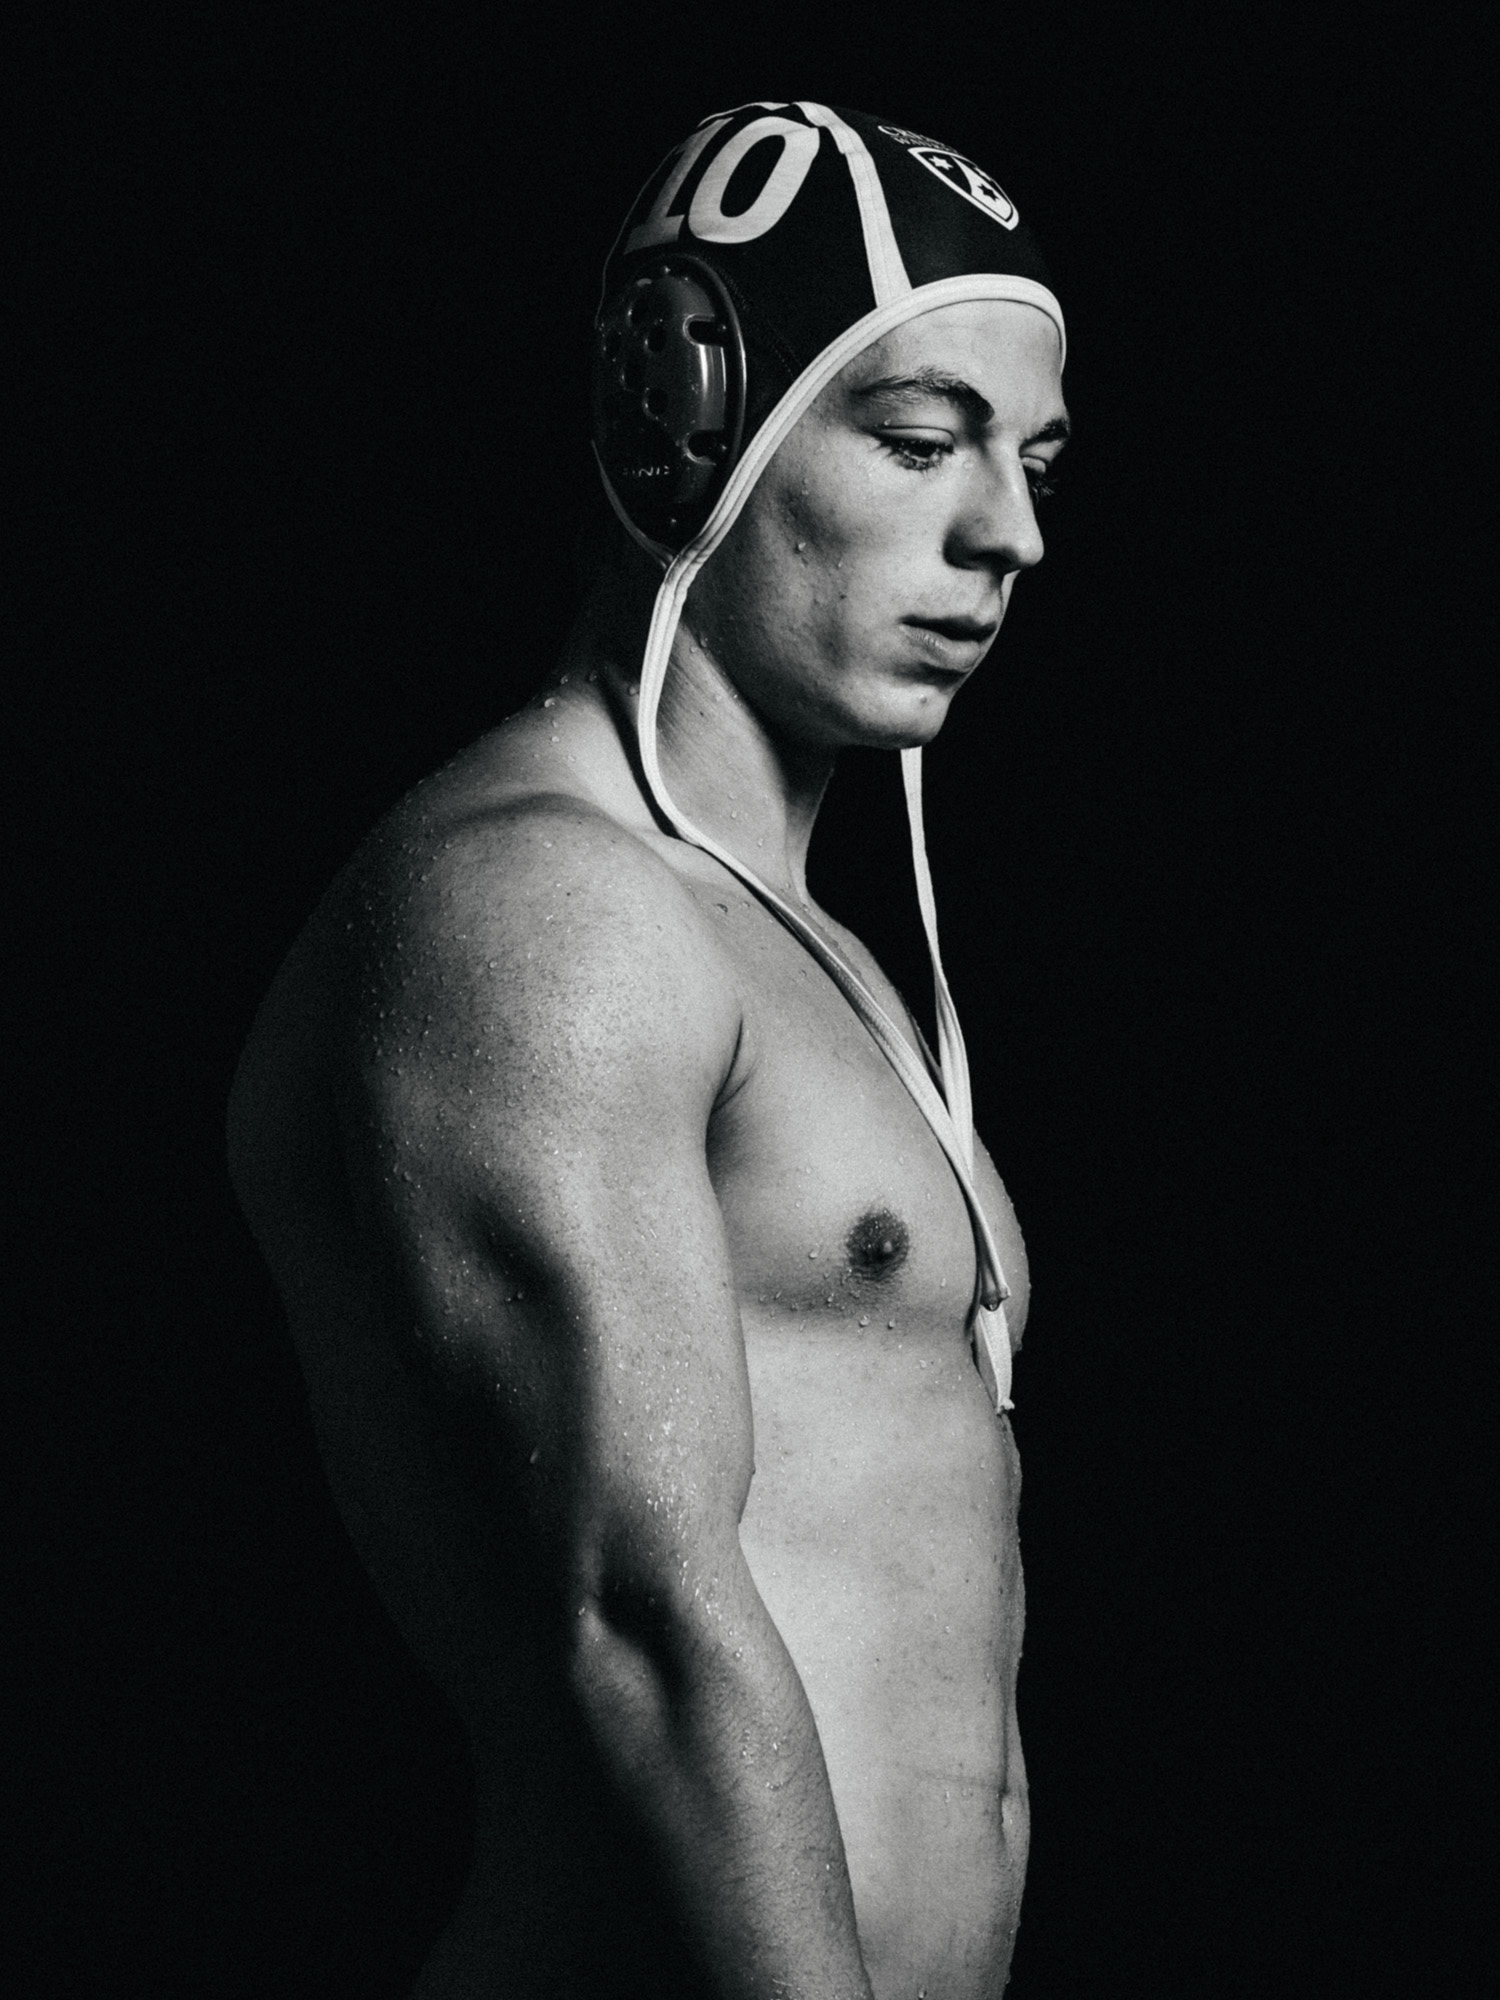 Black and white portrait of a young male water polo player